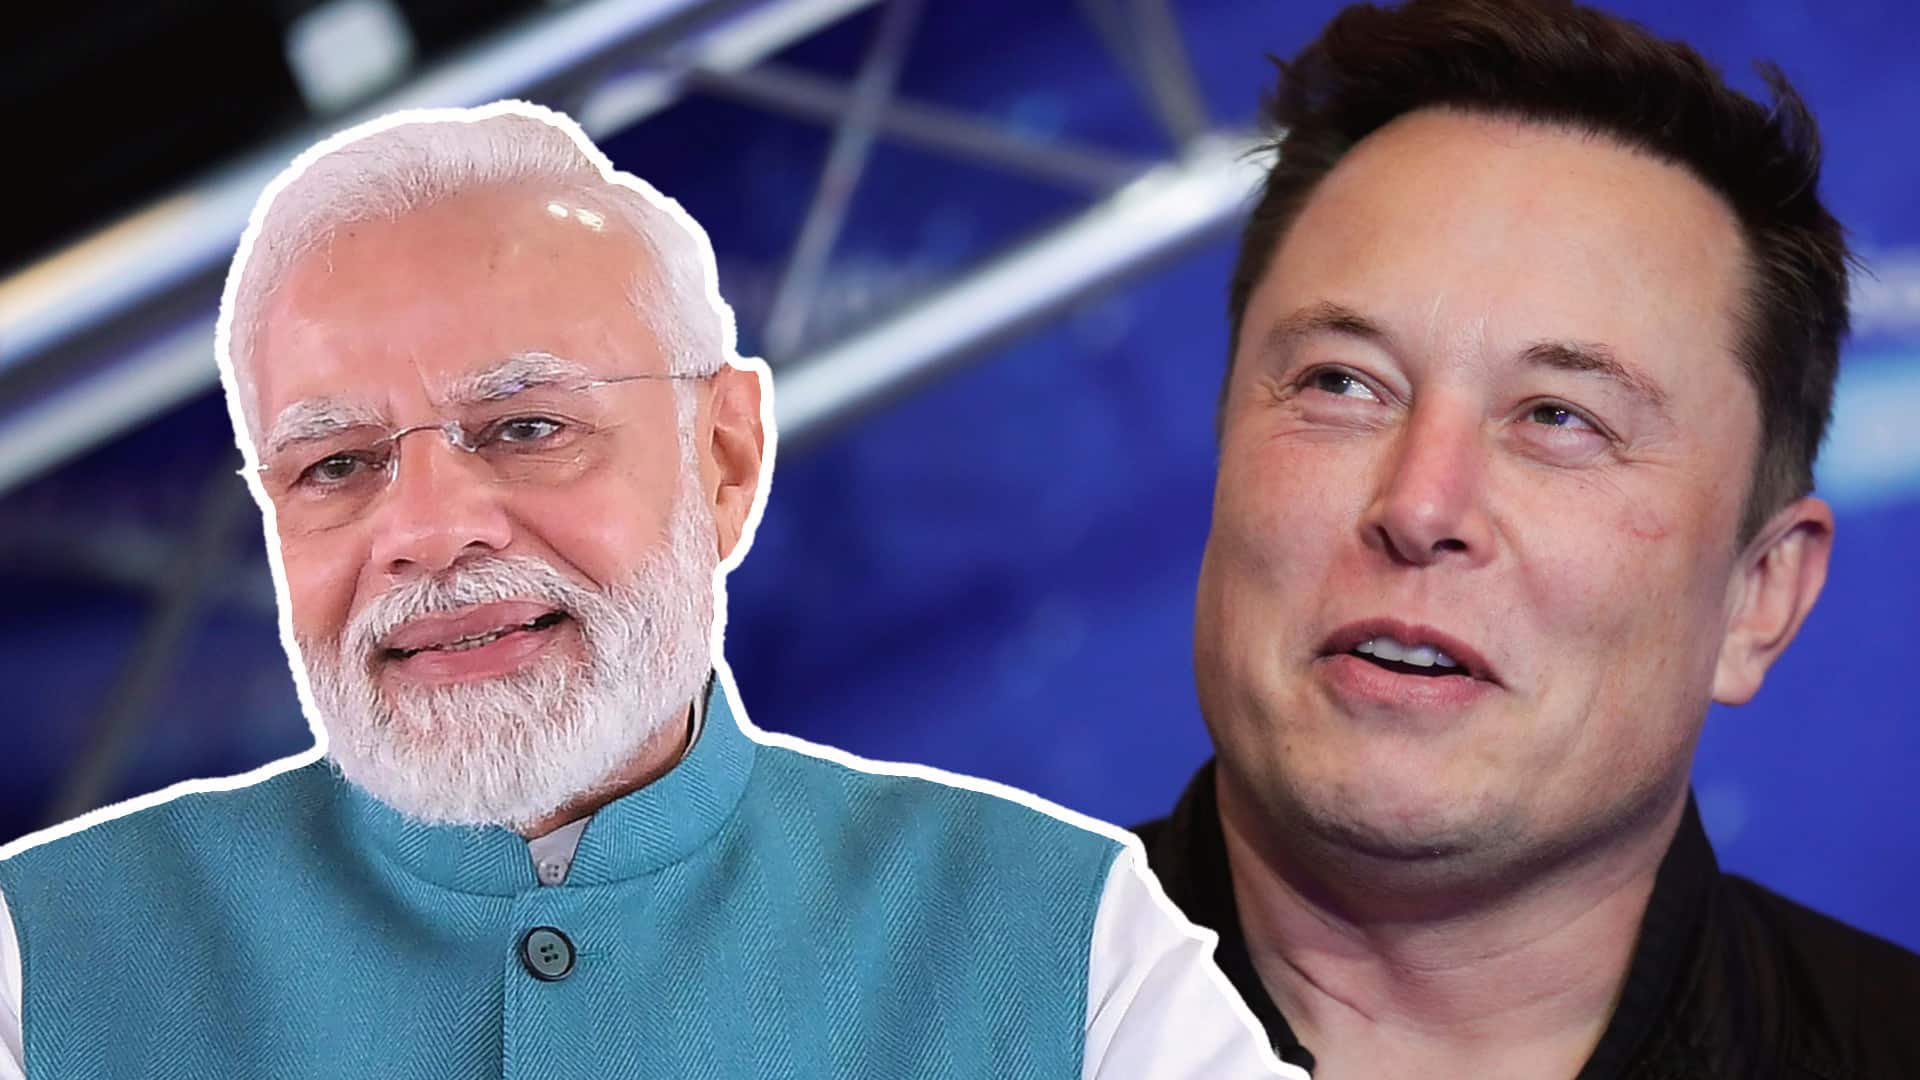 Elon Musk Eyes Meeting with Indian PM Modi Amid Investment Speculation